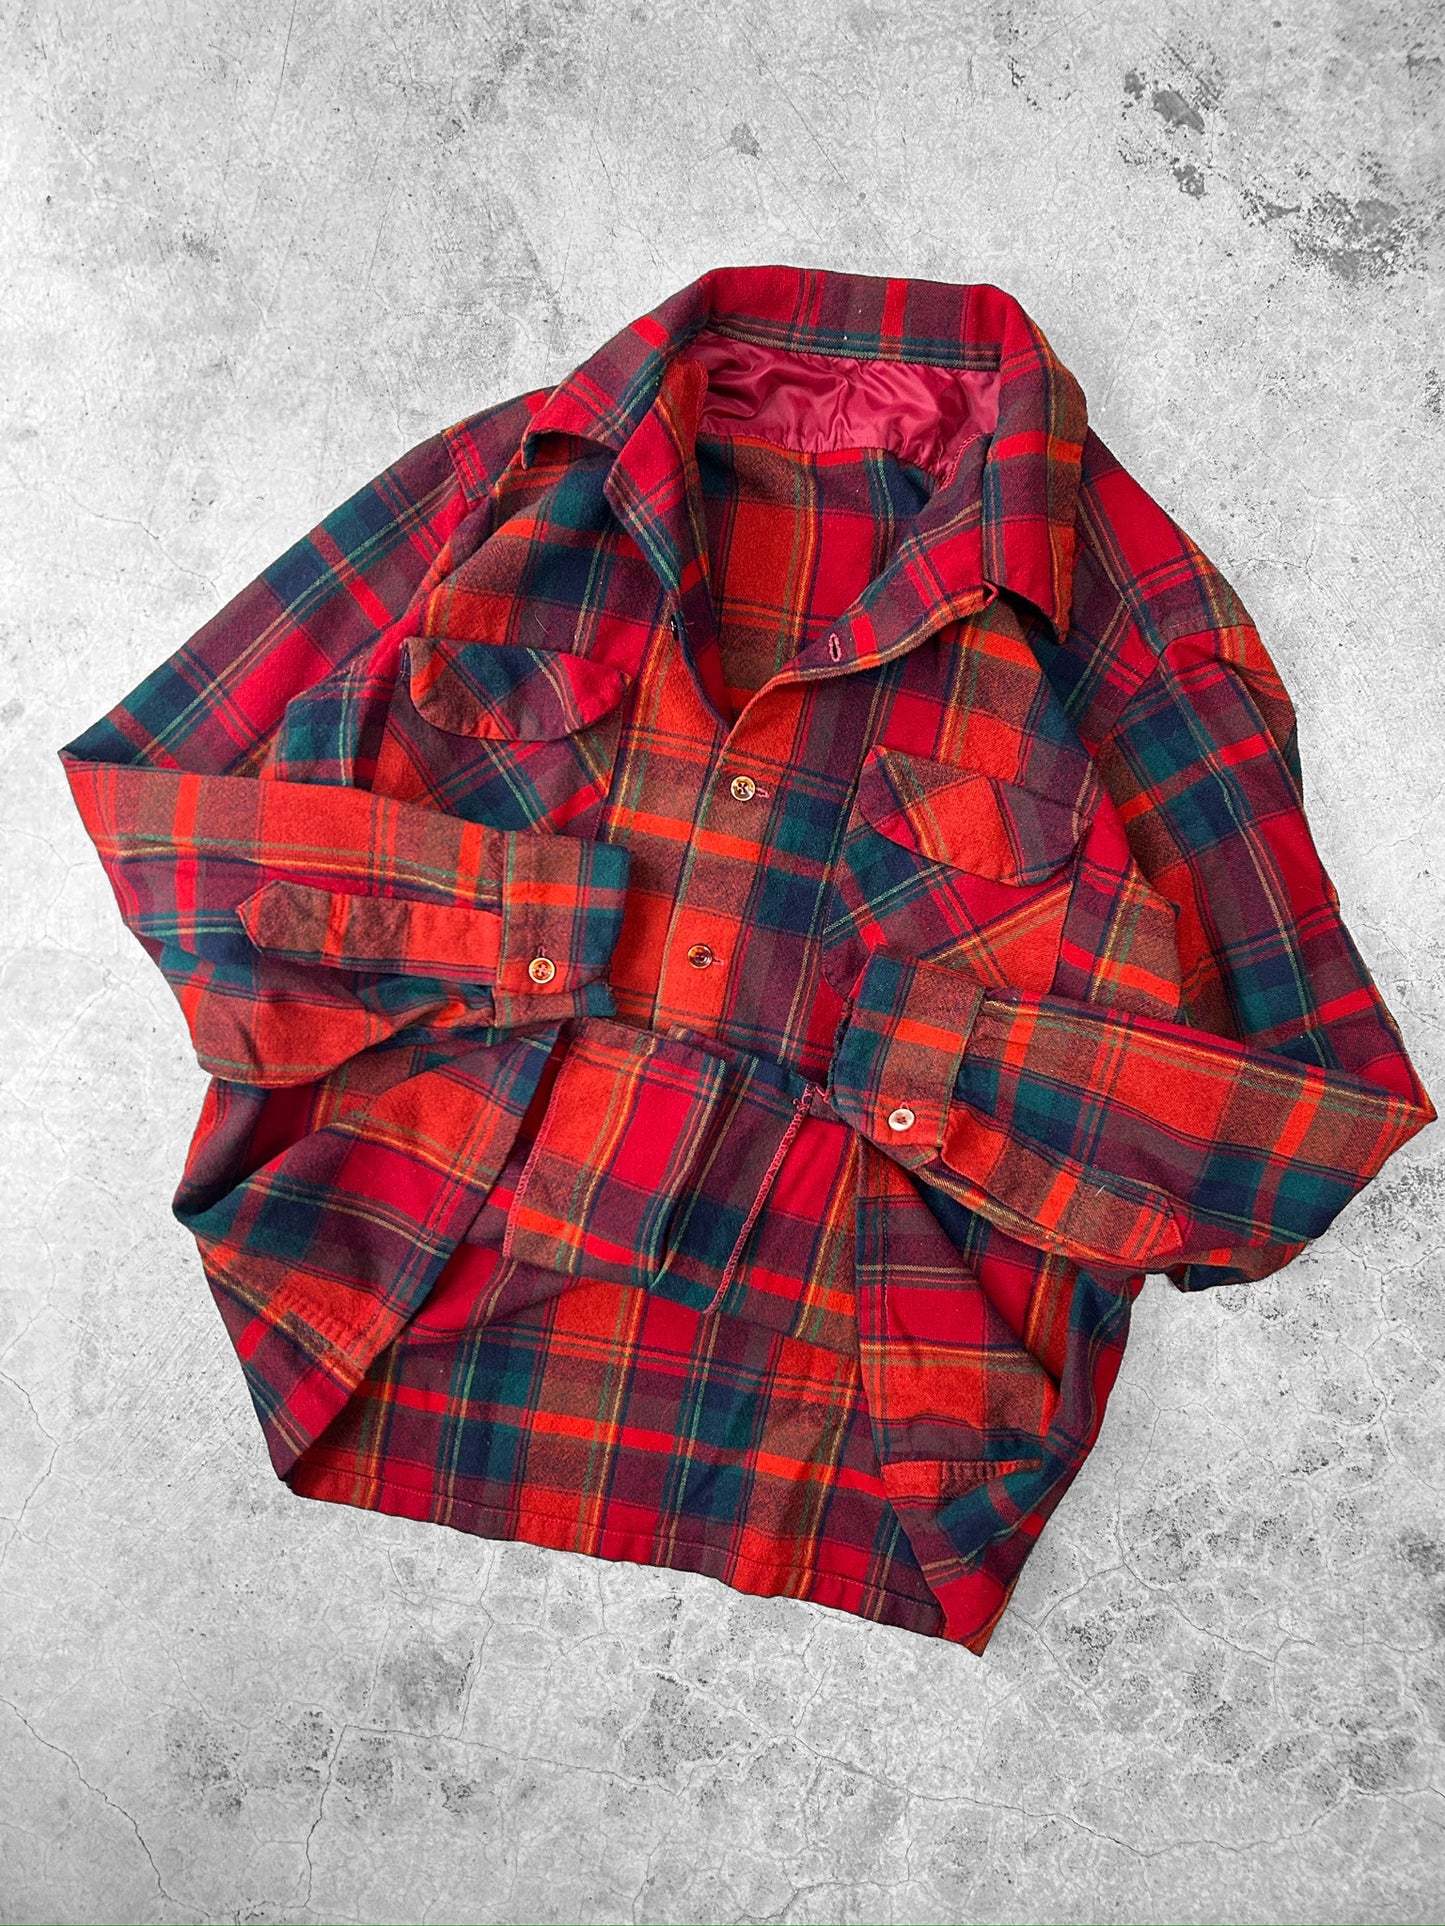 Pendelton Wool Blend Button-Up Red and Orange Flannel - M